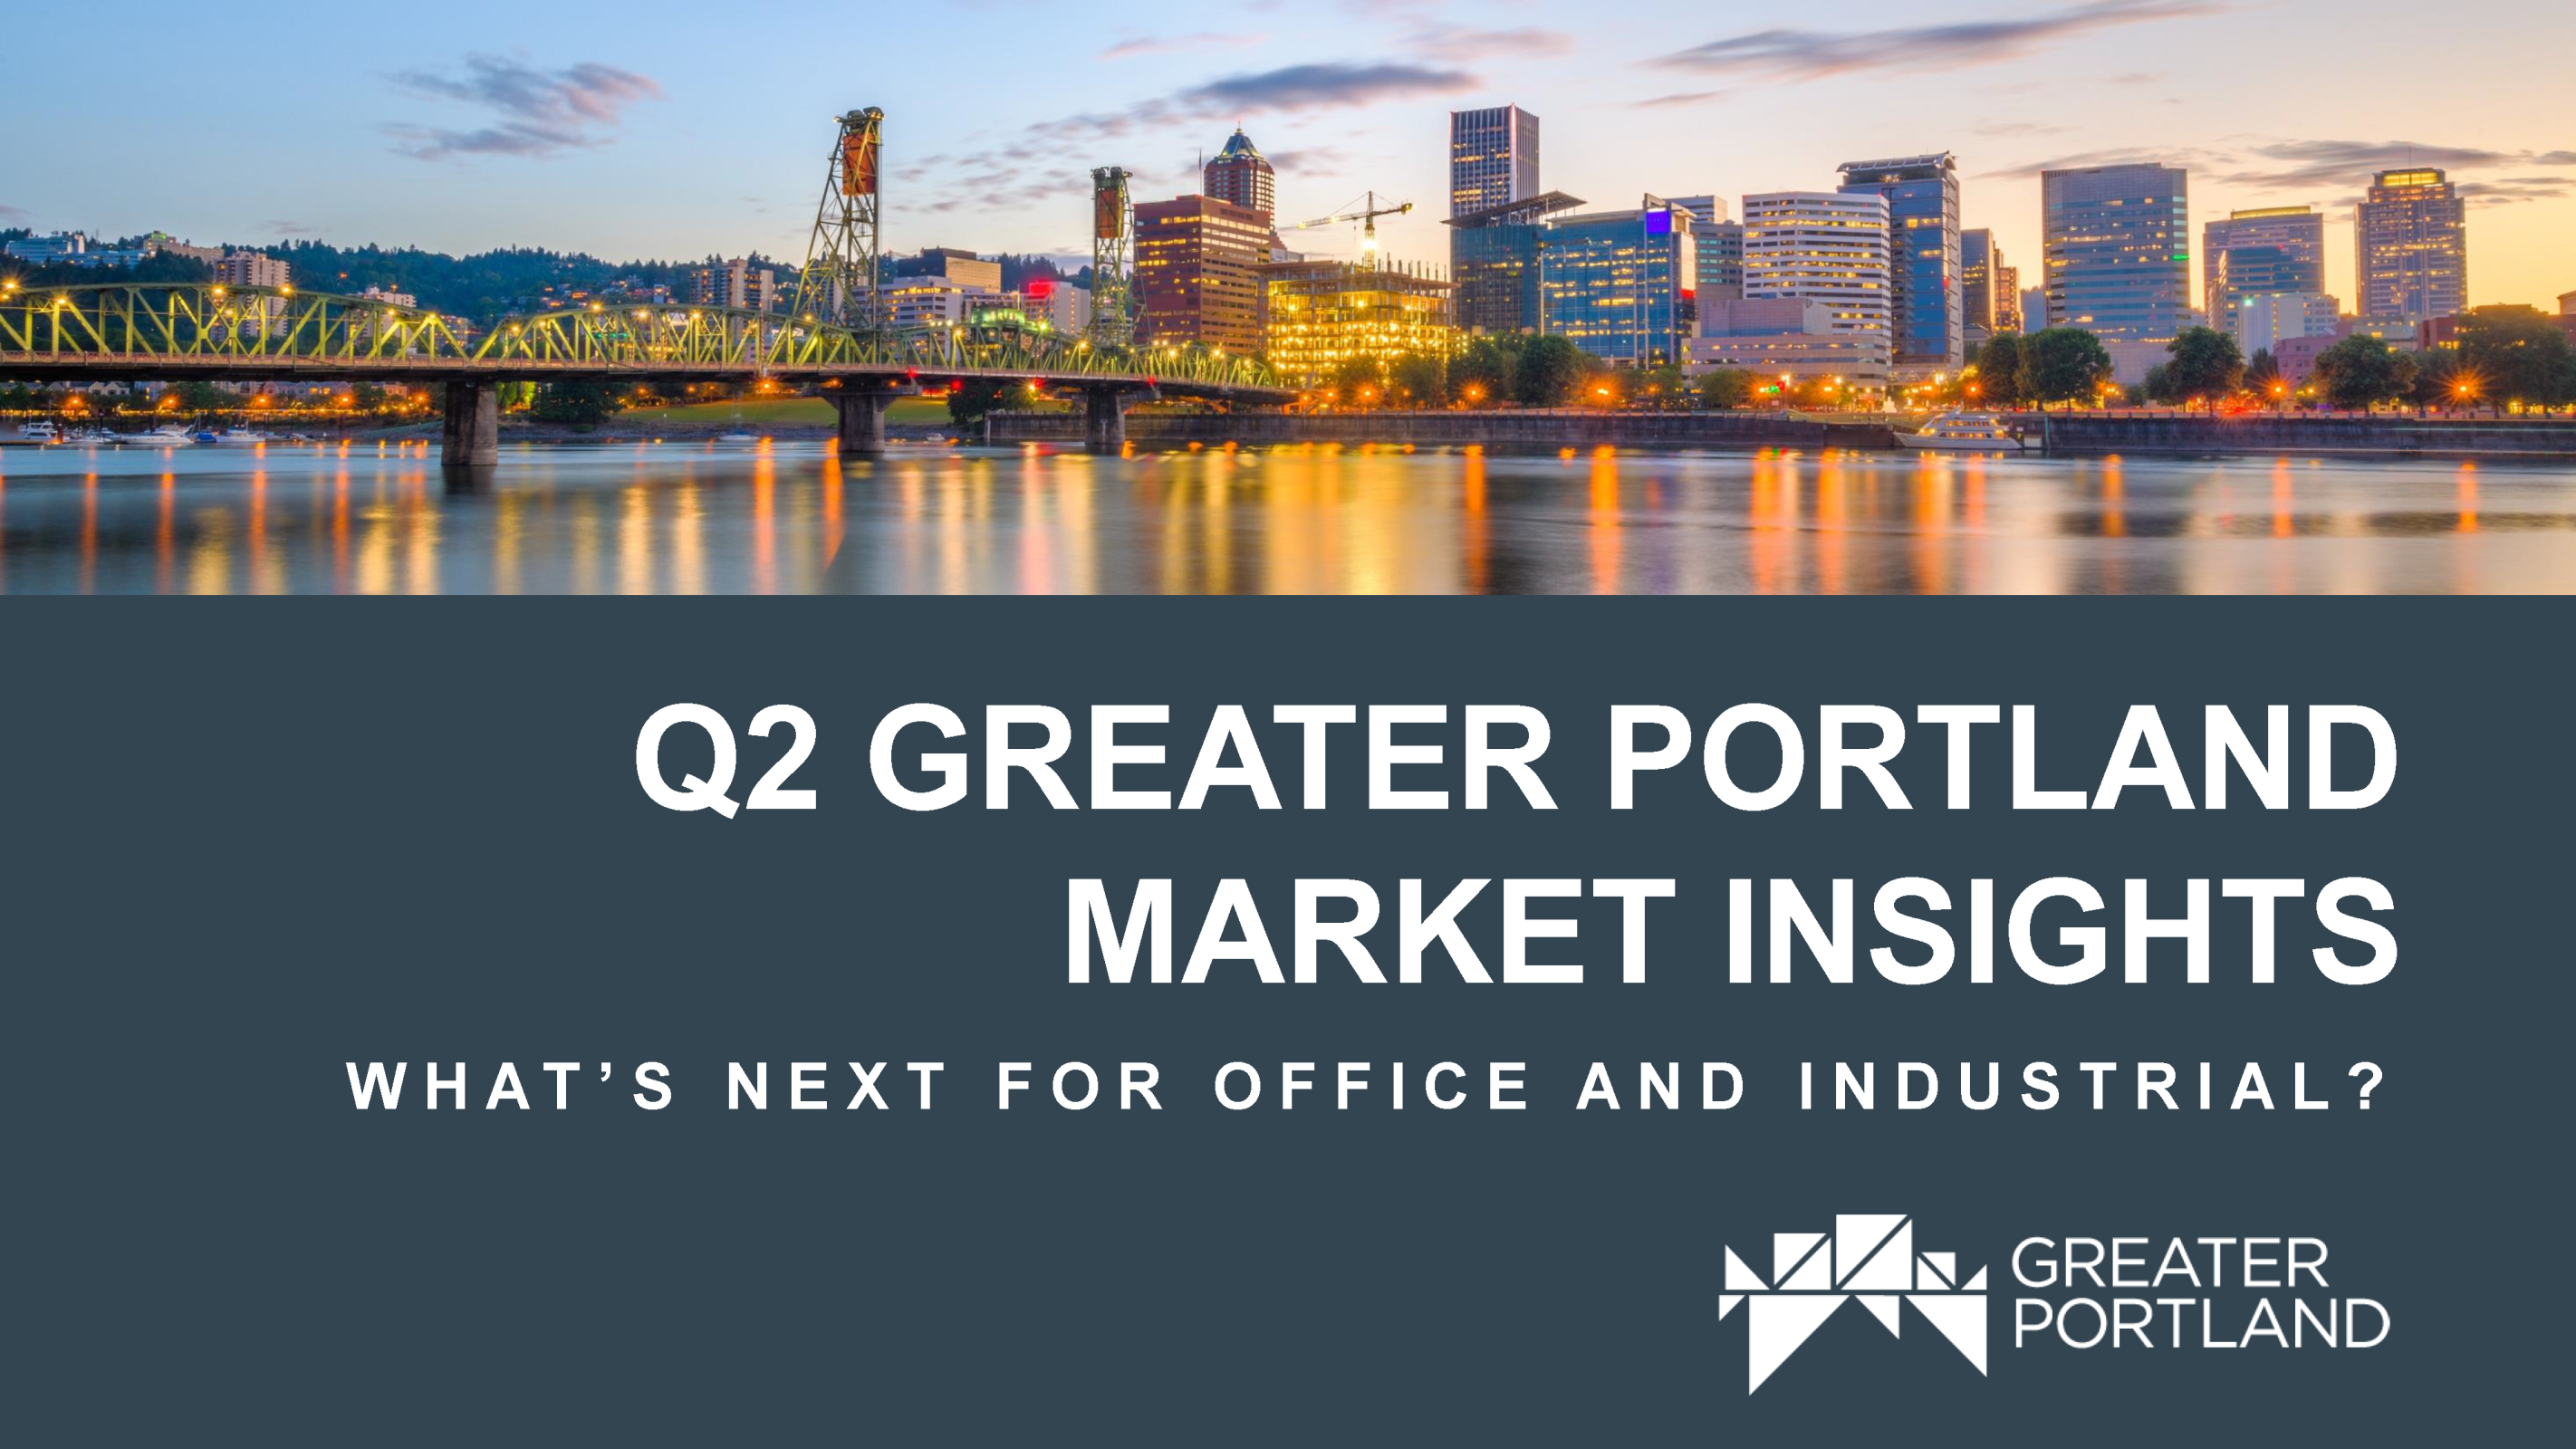 GPI releases Q2 Greater Portland Market Insights Report Photo